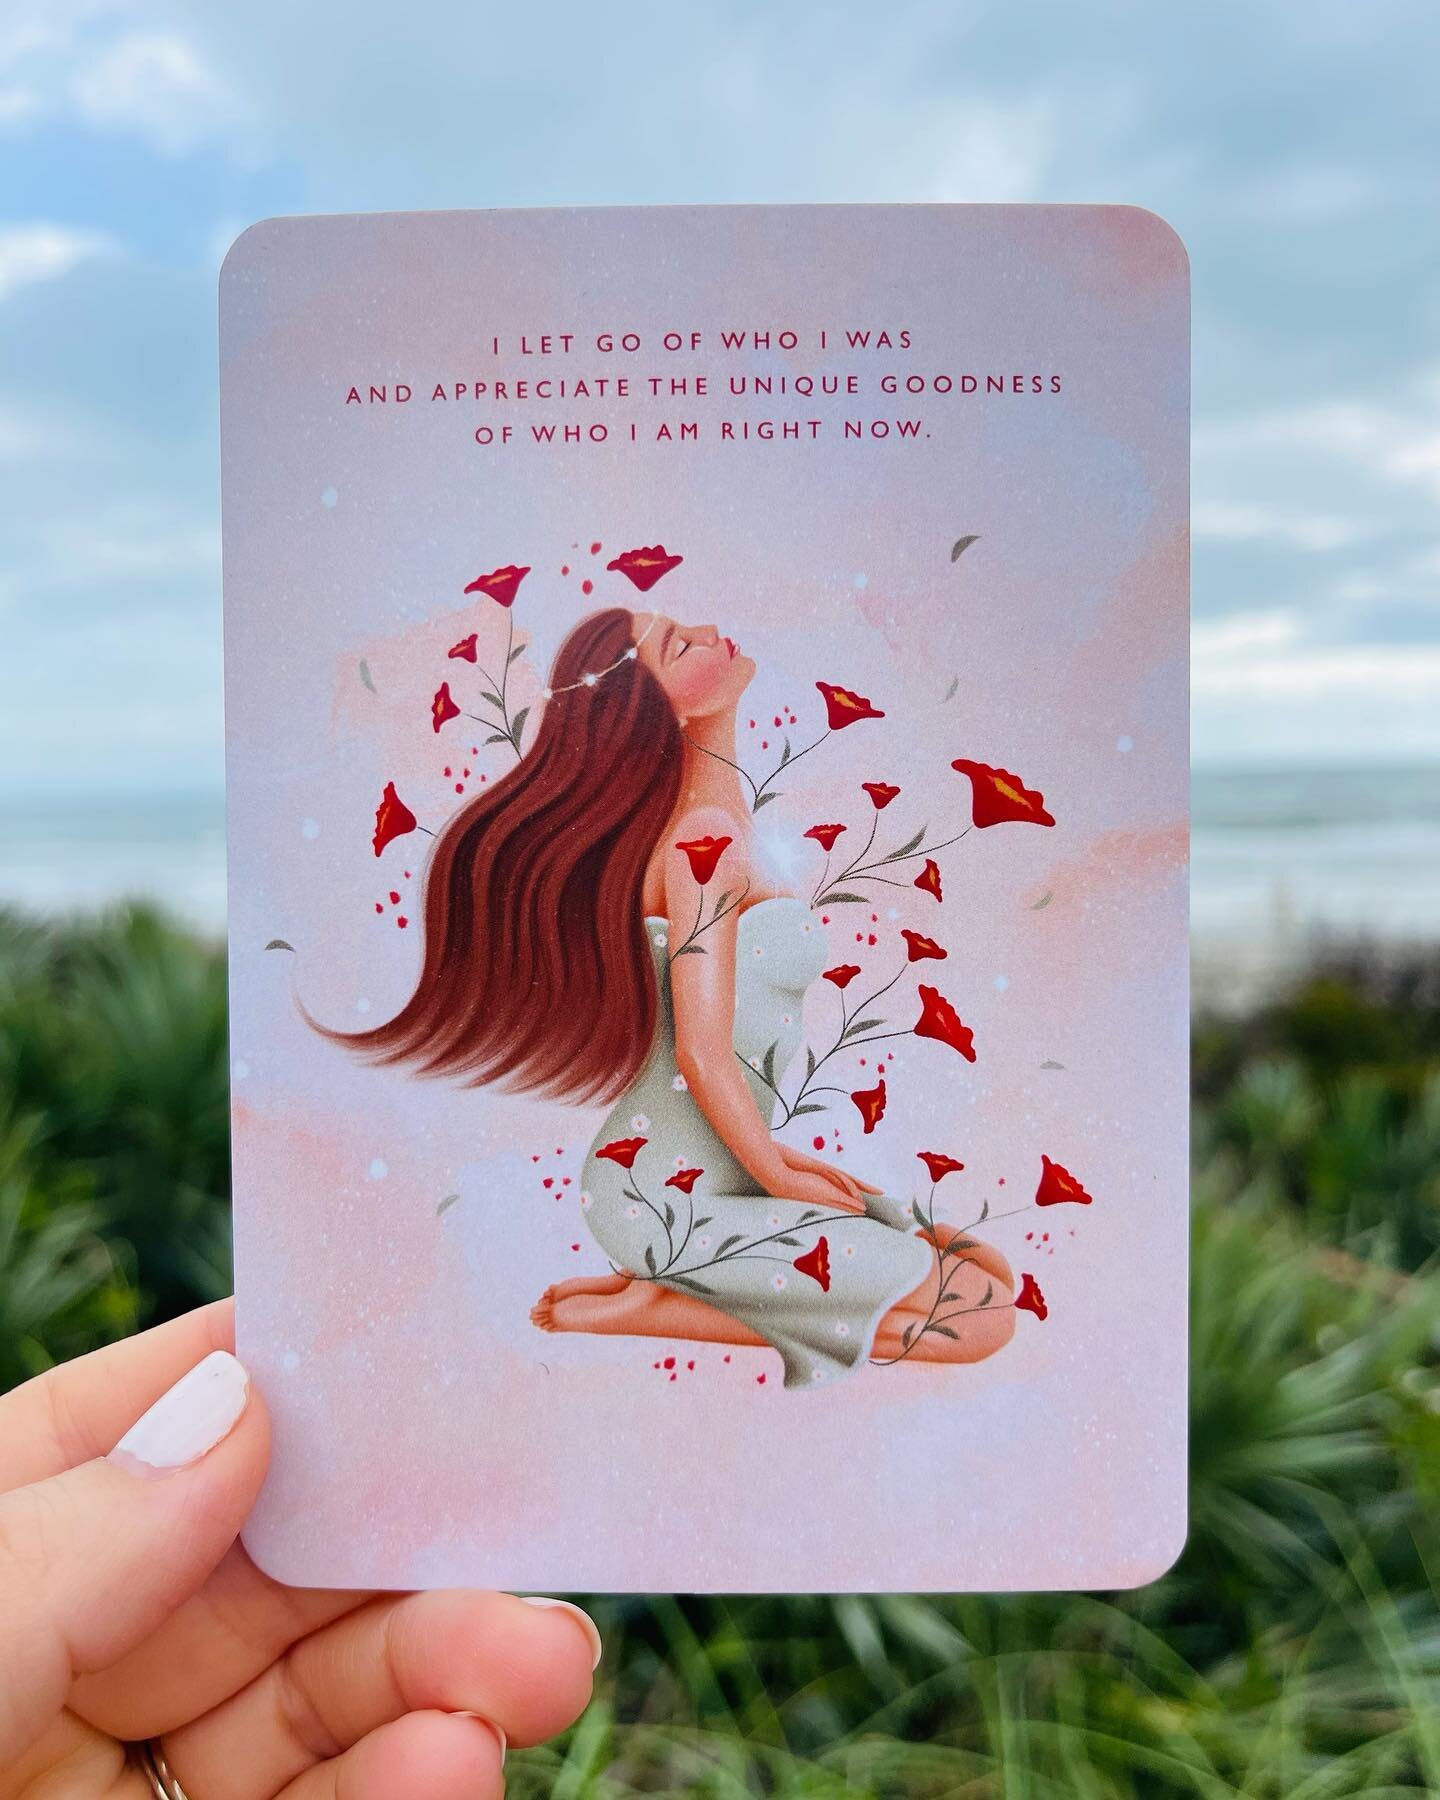 I pulled this card this morning. ✨ It was for me, it was for my beloved friend, it&rsquo;s for you. 

So much of the work I do as a trauma-informed somatic business coach reminds me that we&rsquo;re living in the past and future 99% of the time.

It&